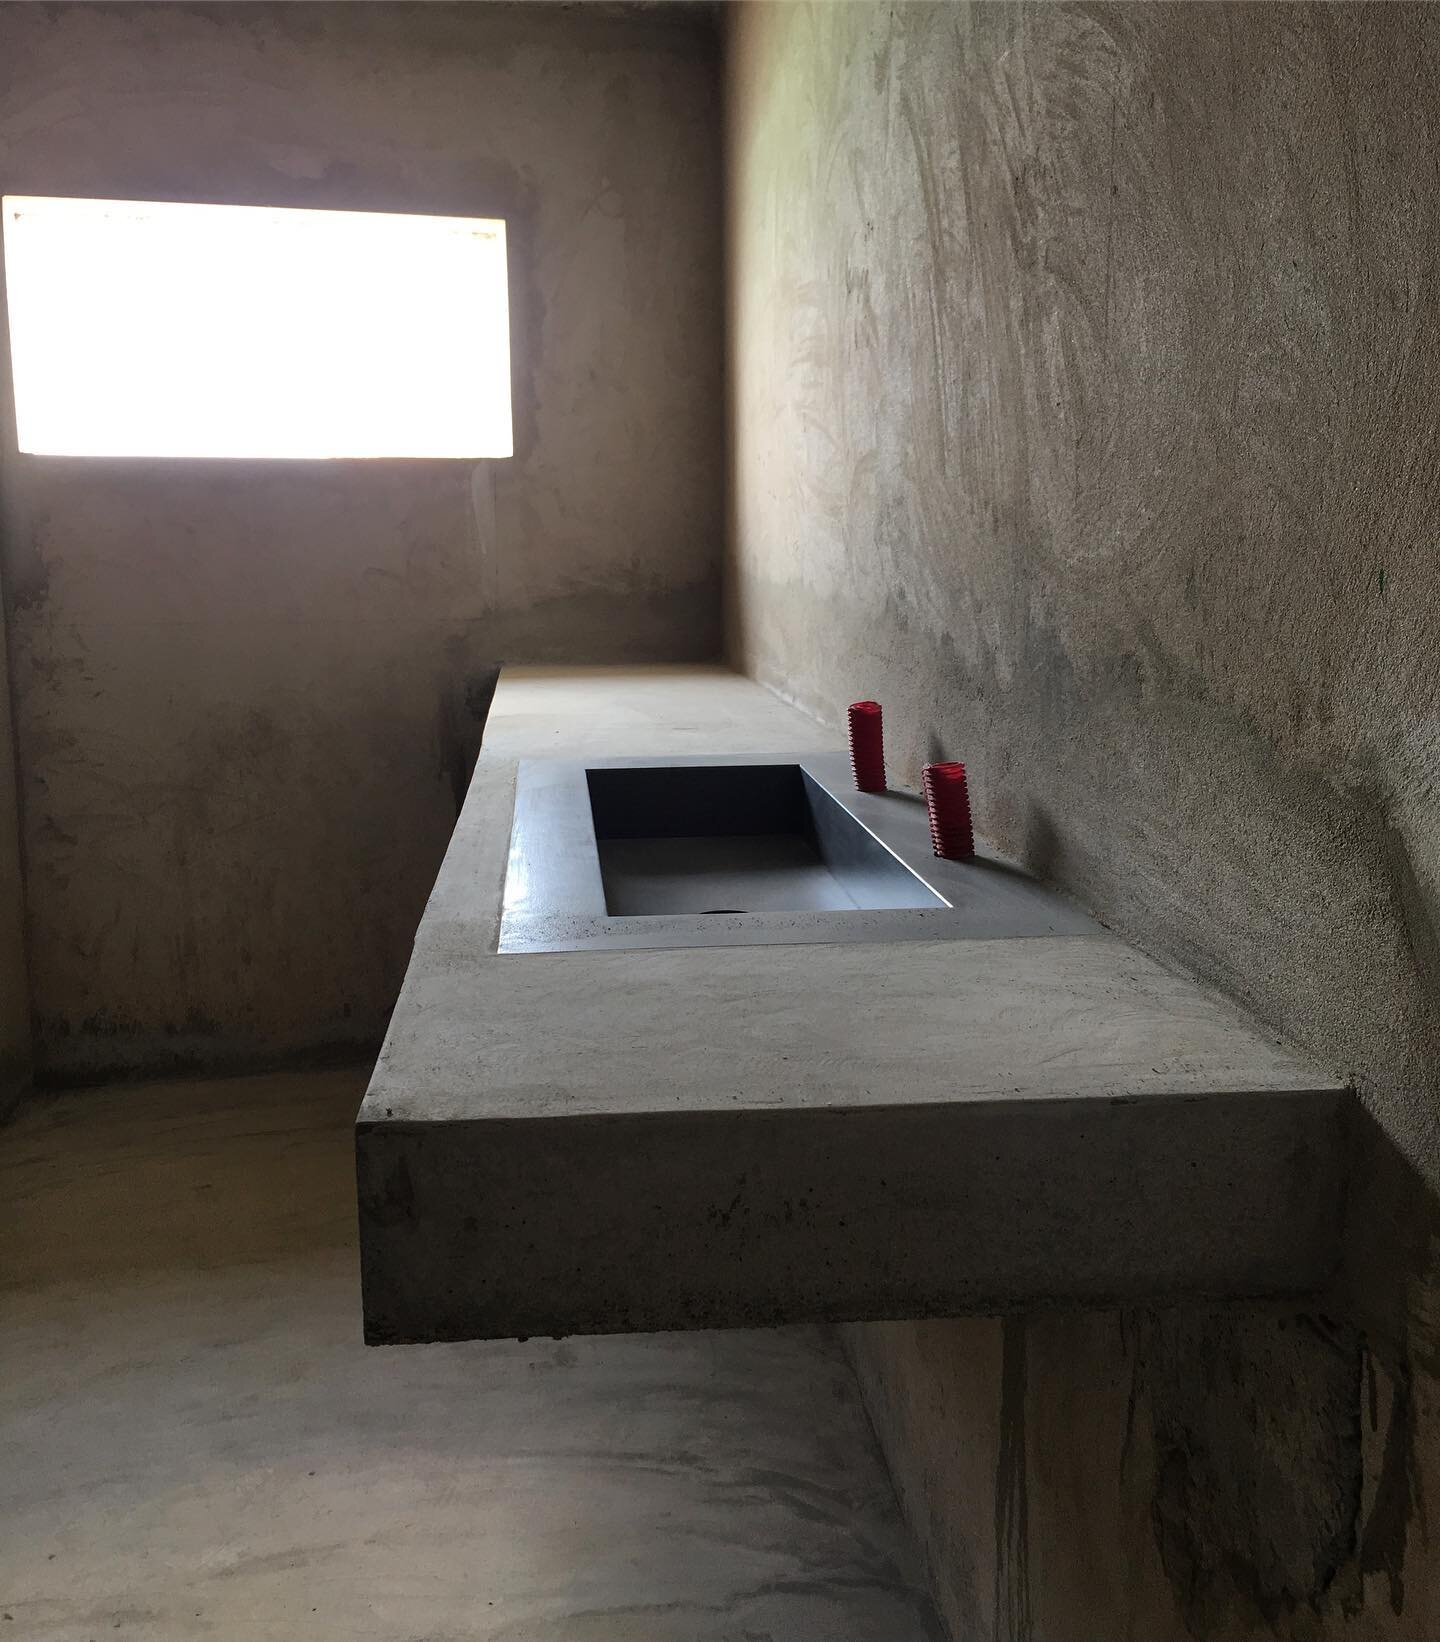 Floating concrete basins recently added to the bathrooms!